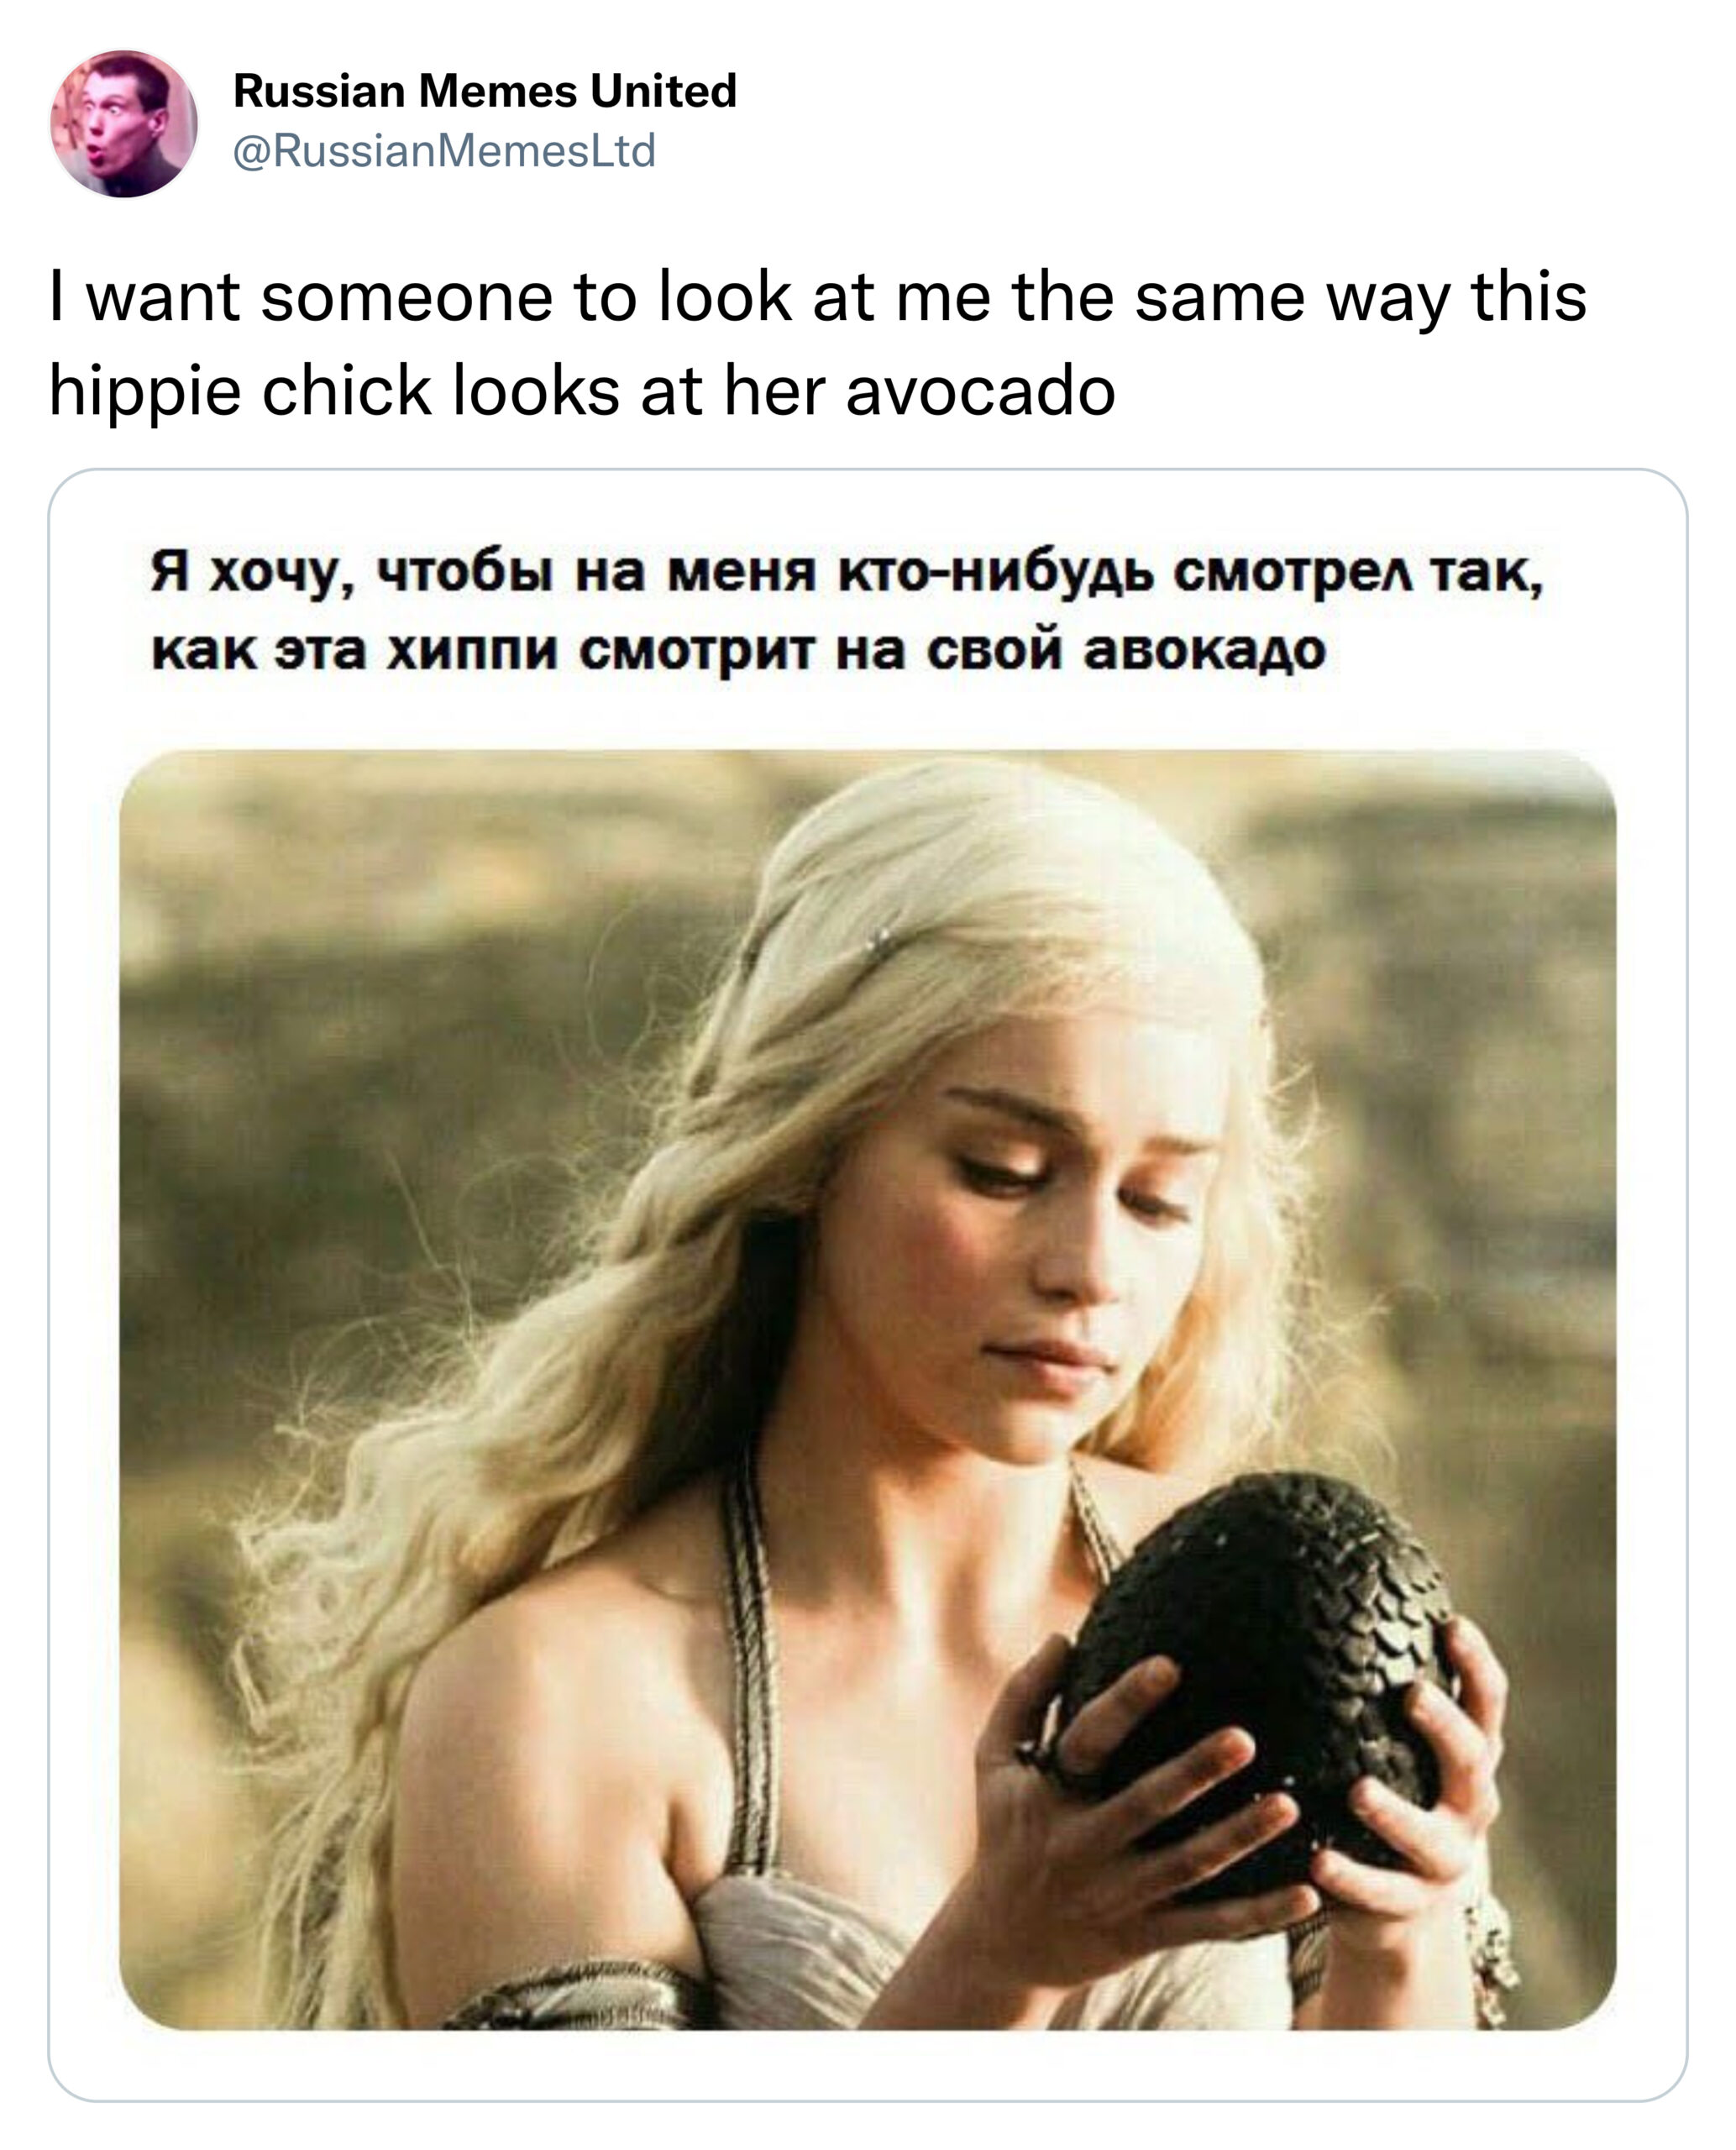 funny tweets - you find the perfect avocado - Russian Memes United I want someone to look at me the same way this hippie chick looks at her avocado , ,